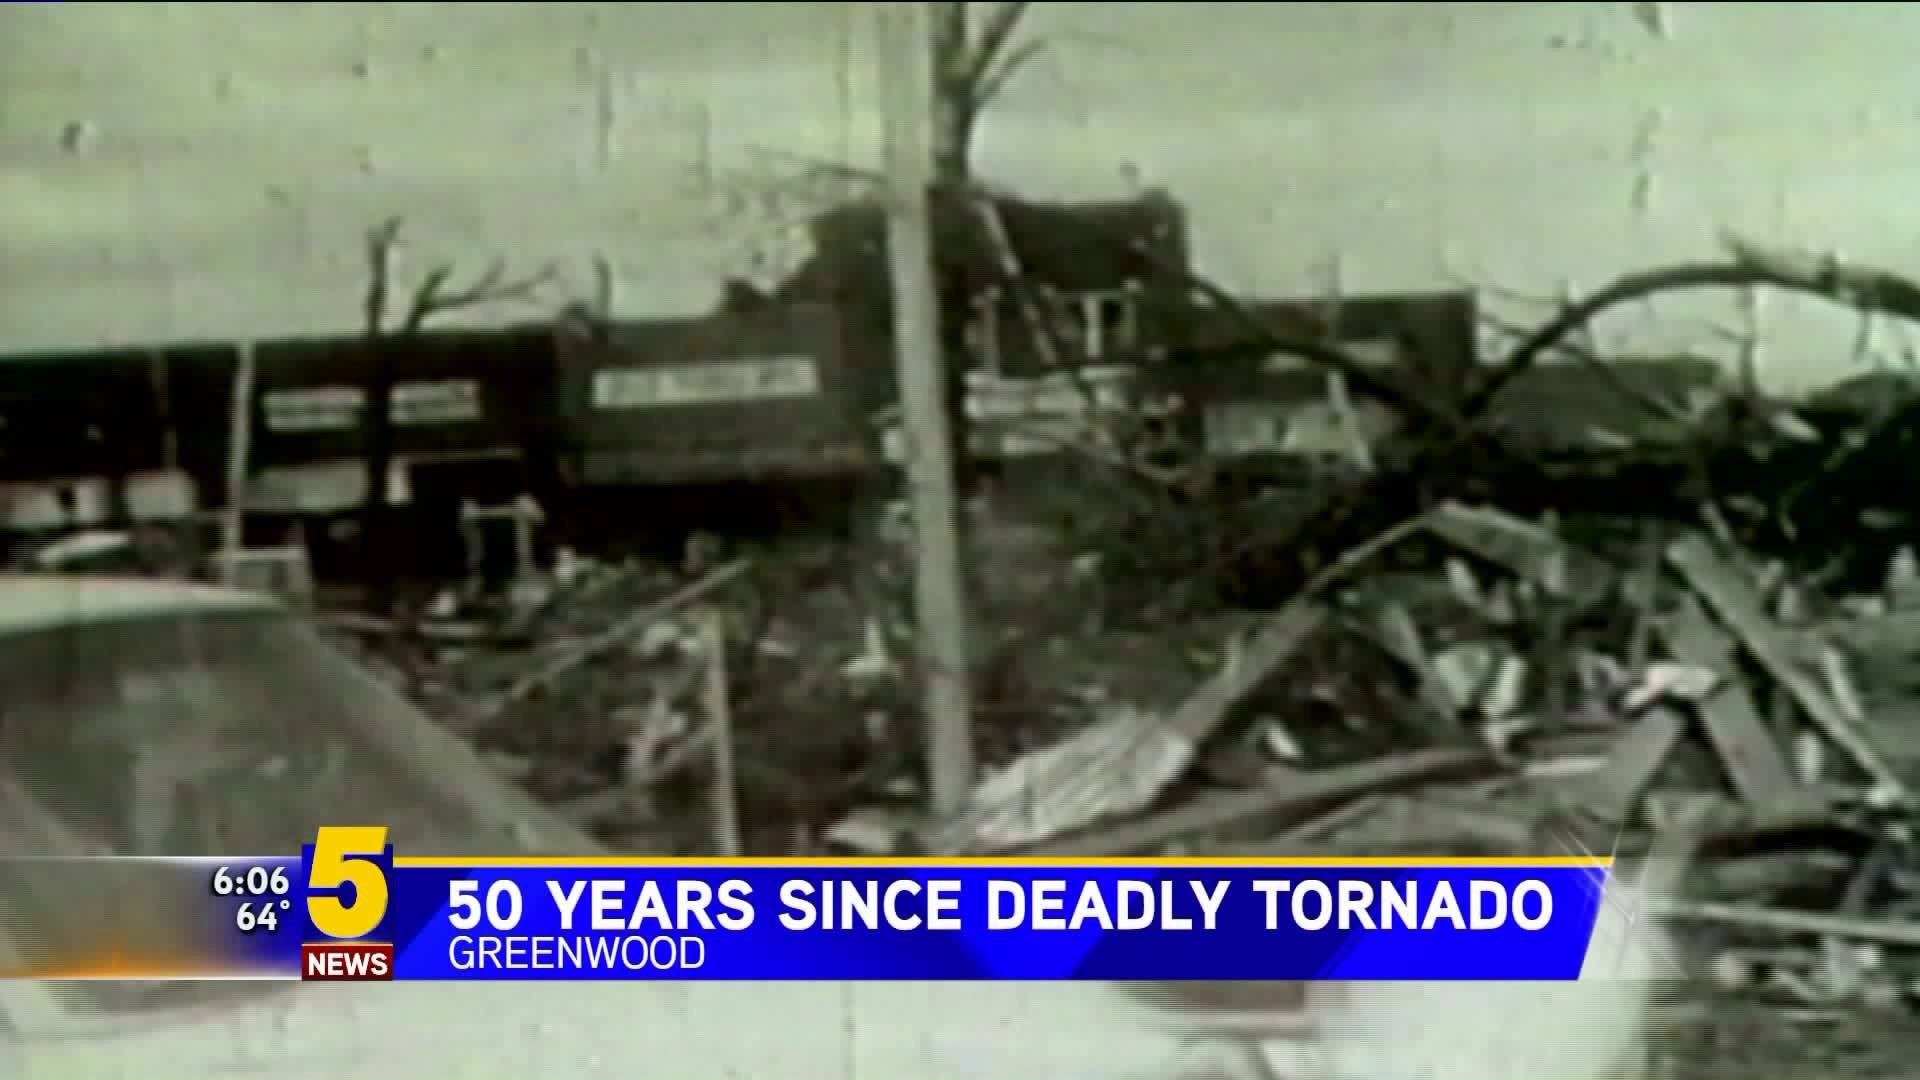 Book Released Commemorating 50th Anniversary Of Deadly Greenwood